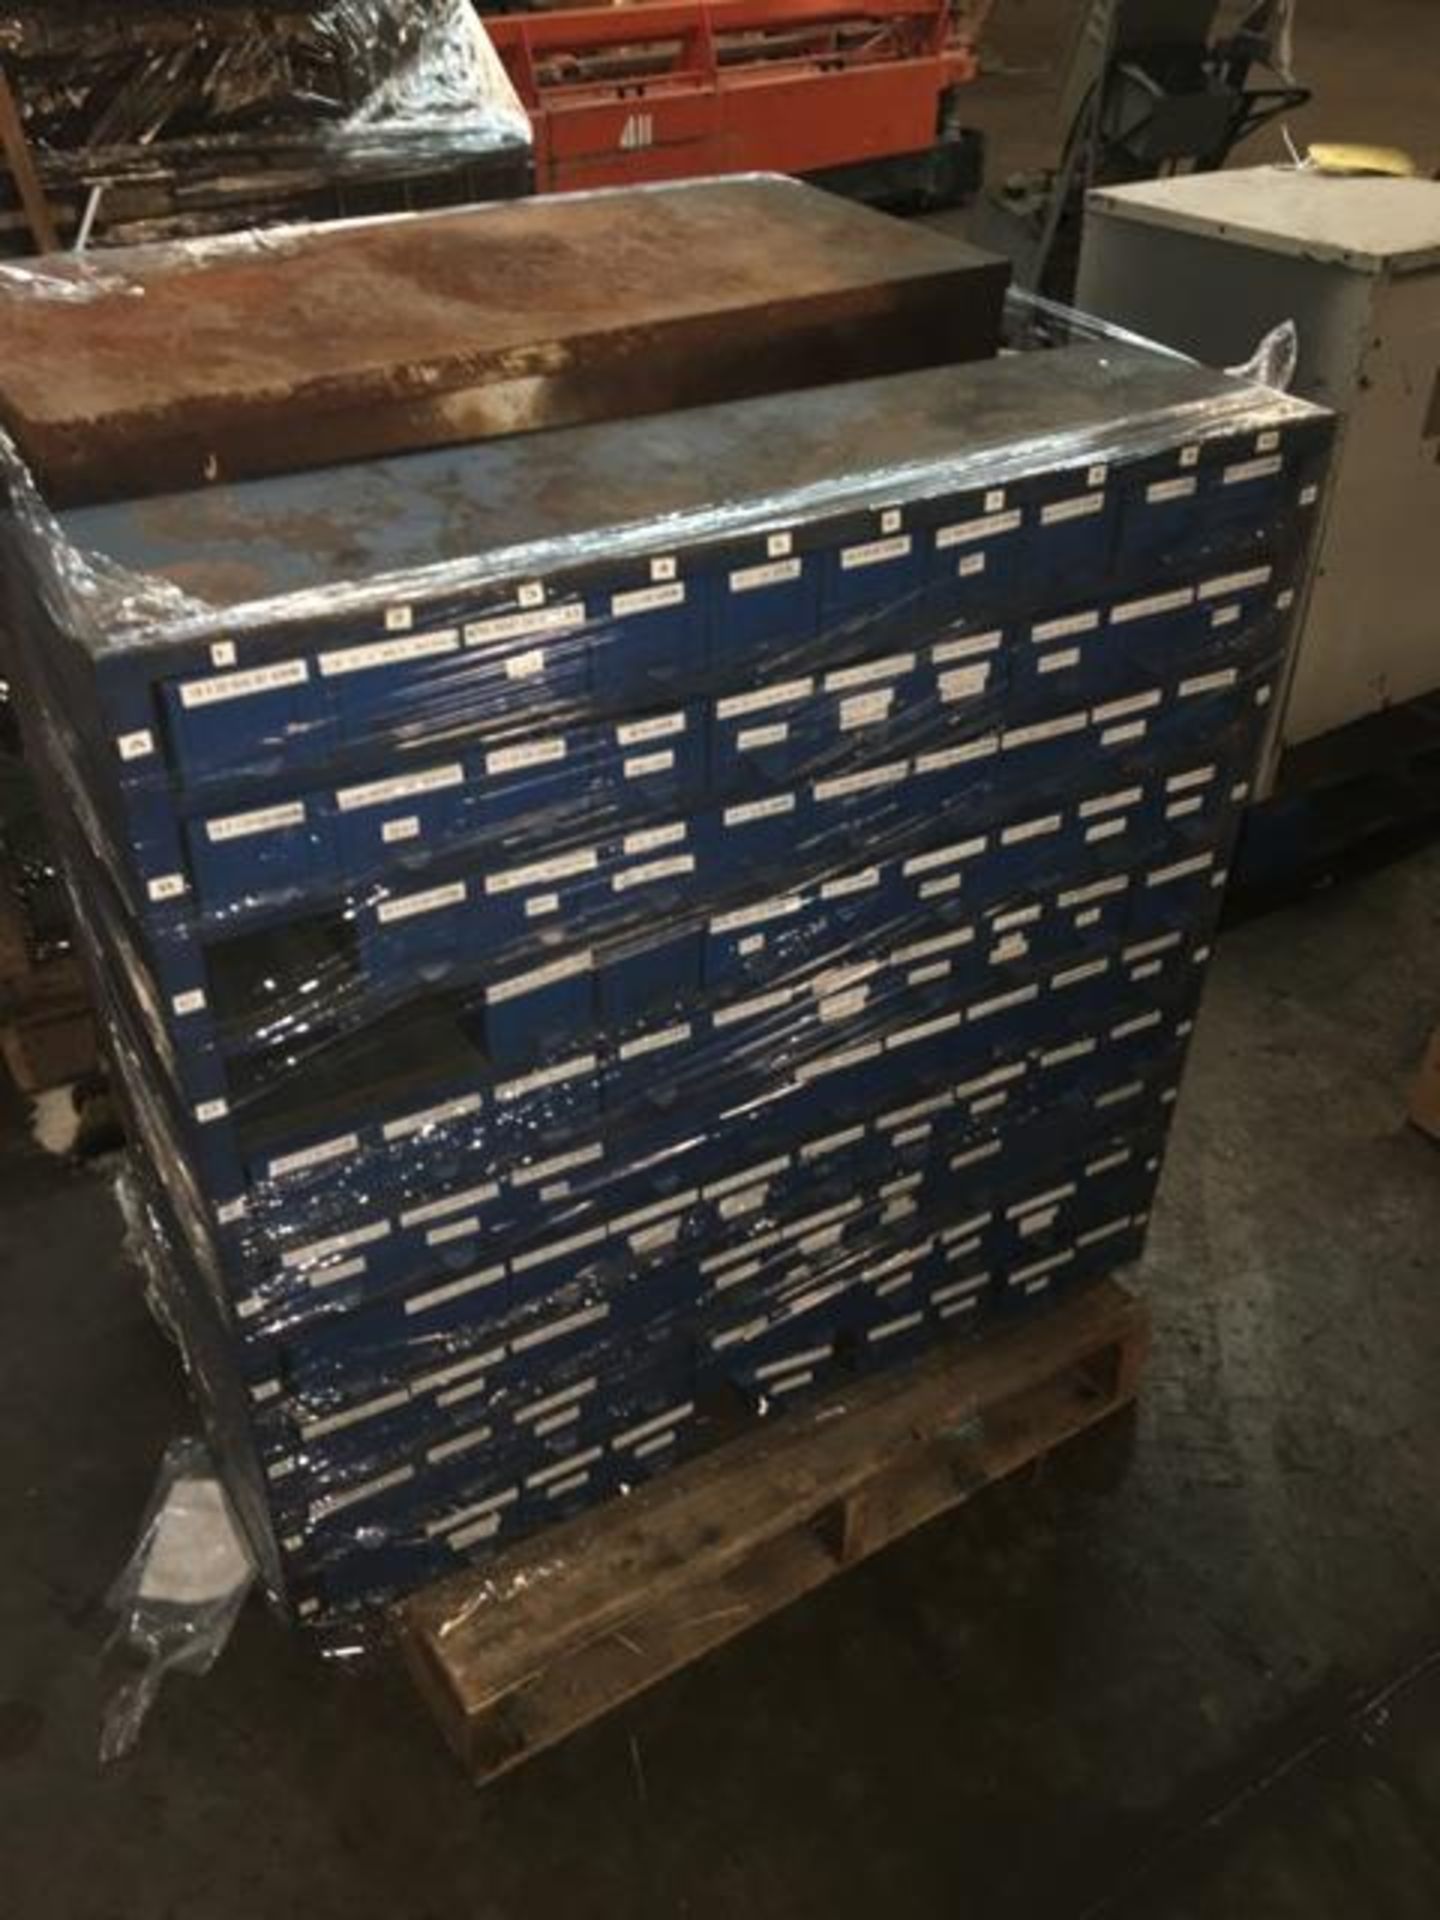 Bolt/Small Parts Bin, Qty (4) Bins on Pallet, Fabrication: Metal, Excellent Condition, Size: 24 Draw - Image 2 of 2